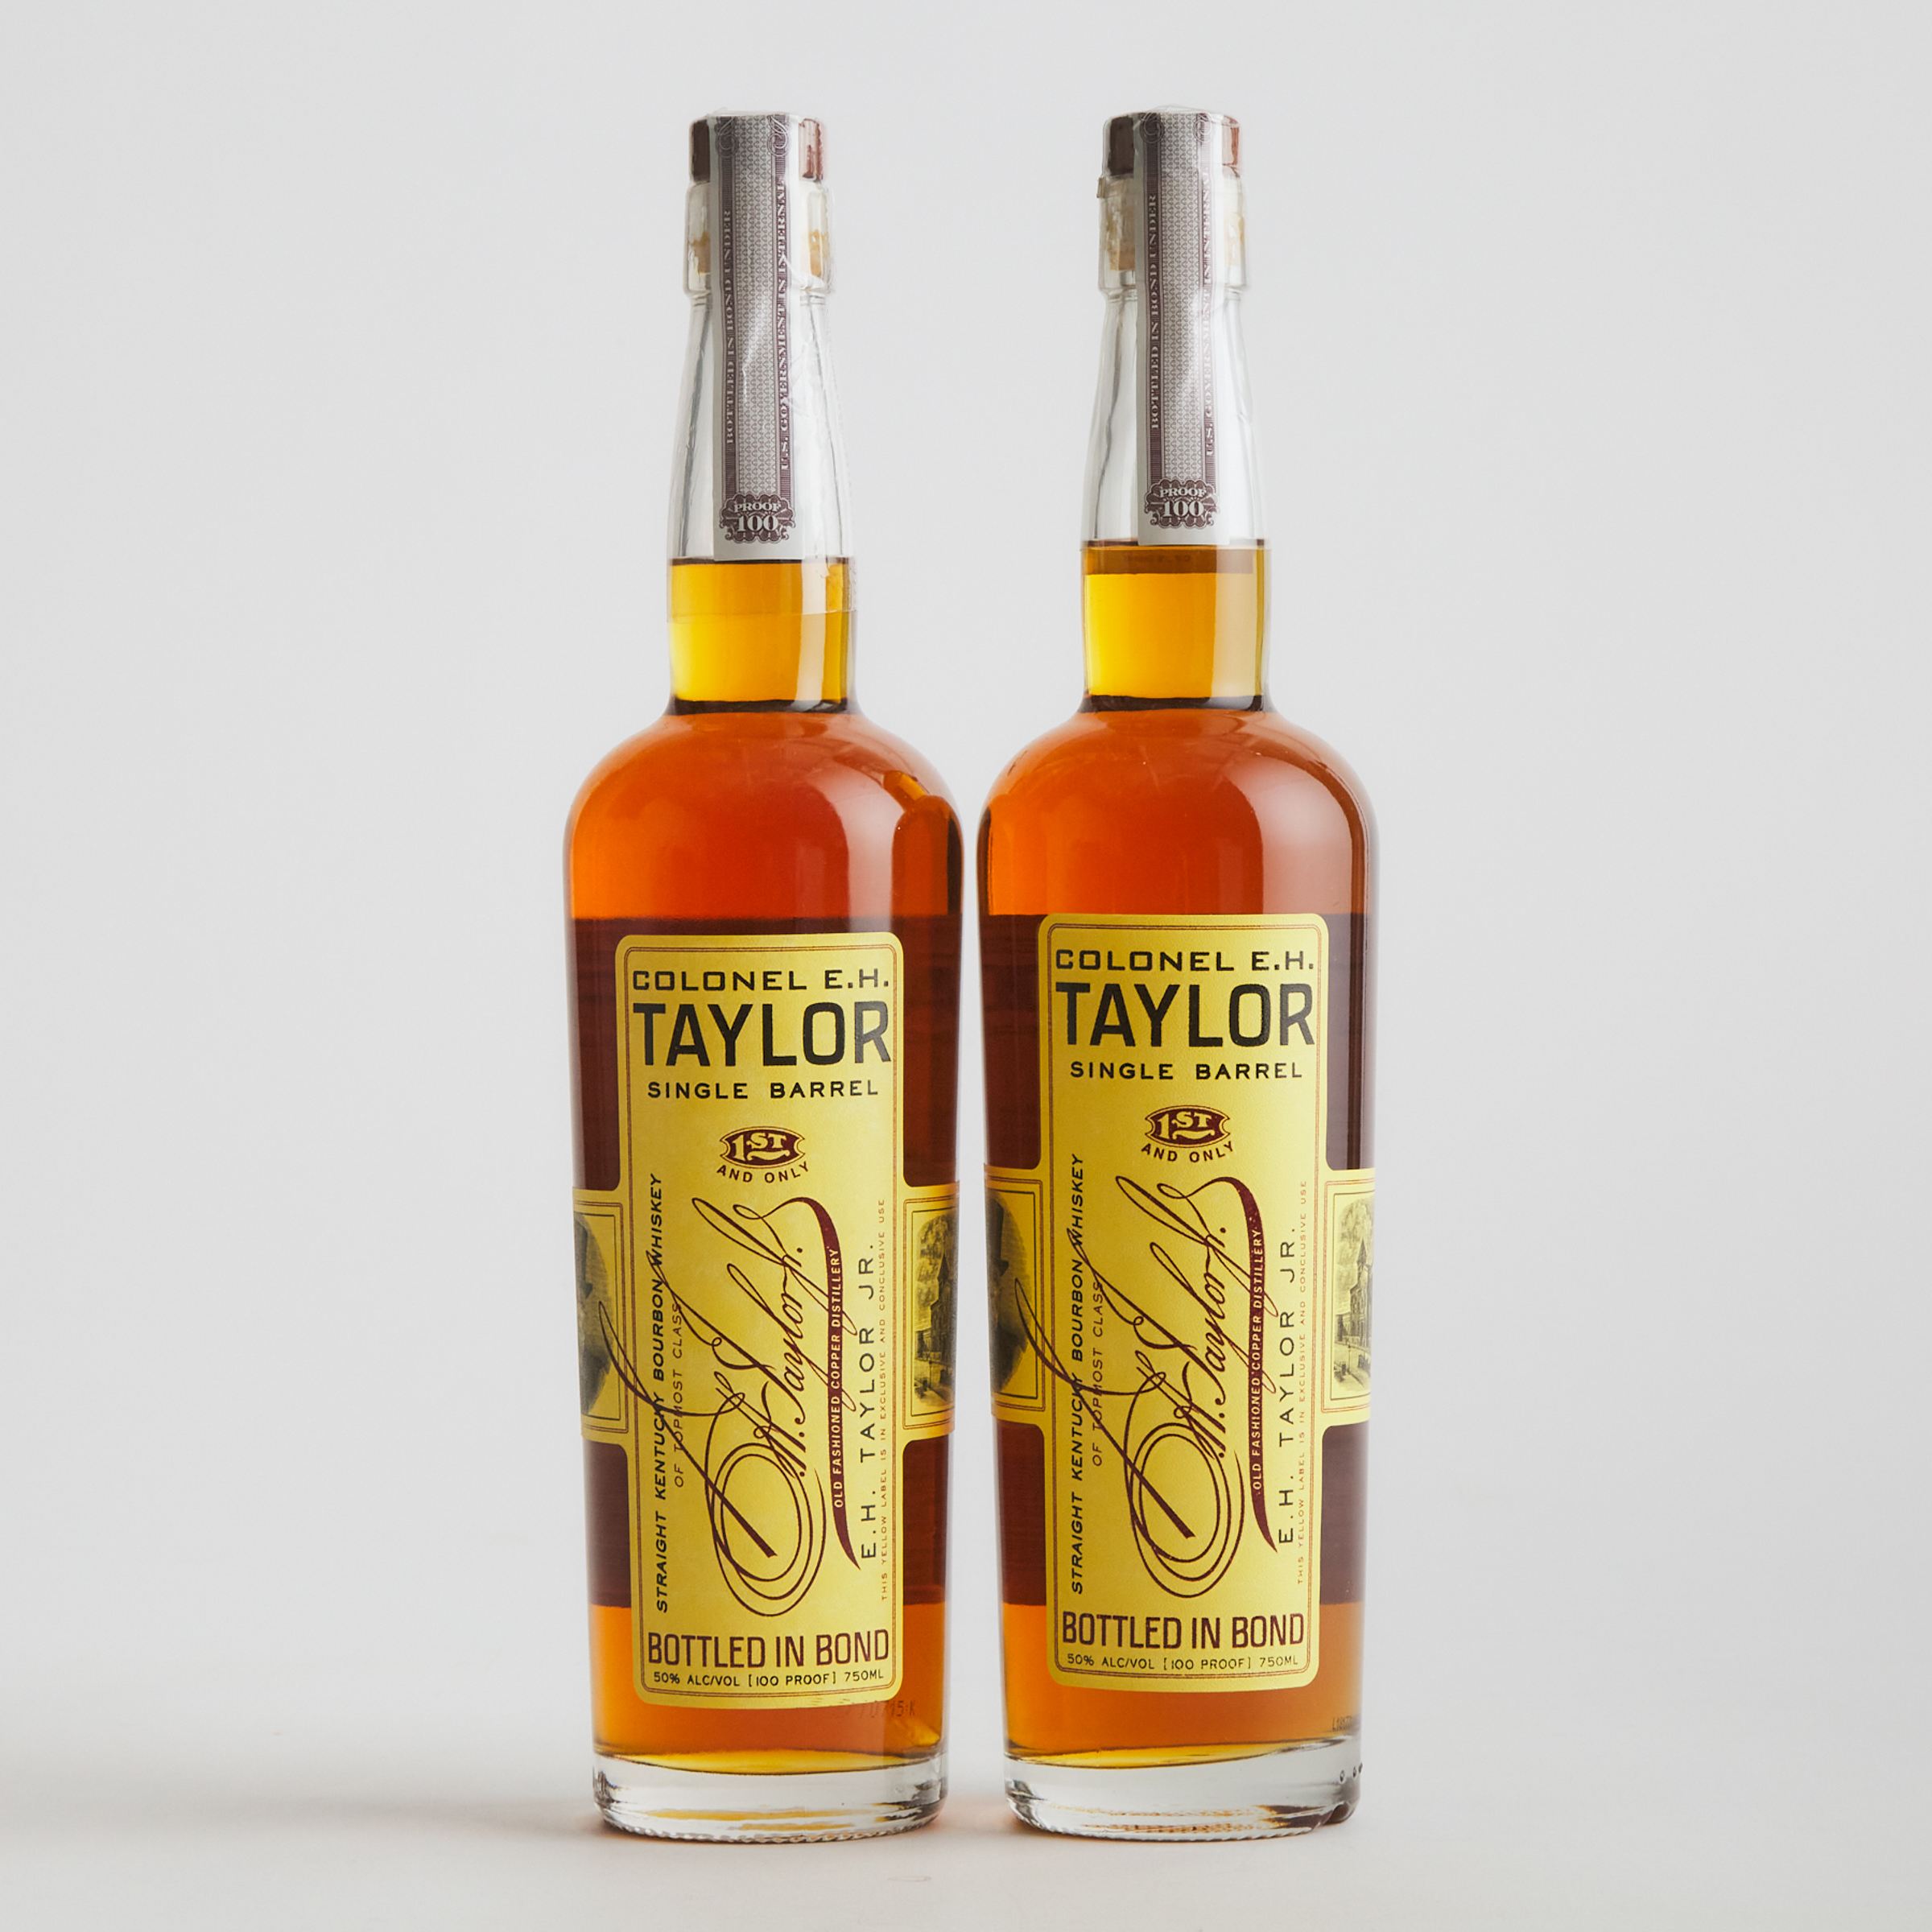 COLONEL E.H. TAYLOR JR. KENTUCKY STRAIGHT BOURBON WHISKEY (ONE 750 ML)
COLONEL E.H. TAYLOR JR. KENTUCKY STRAIGHT BOURBON WHISKEY (ONE 750 ML)